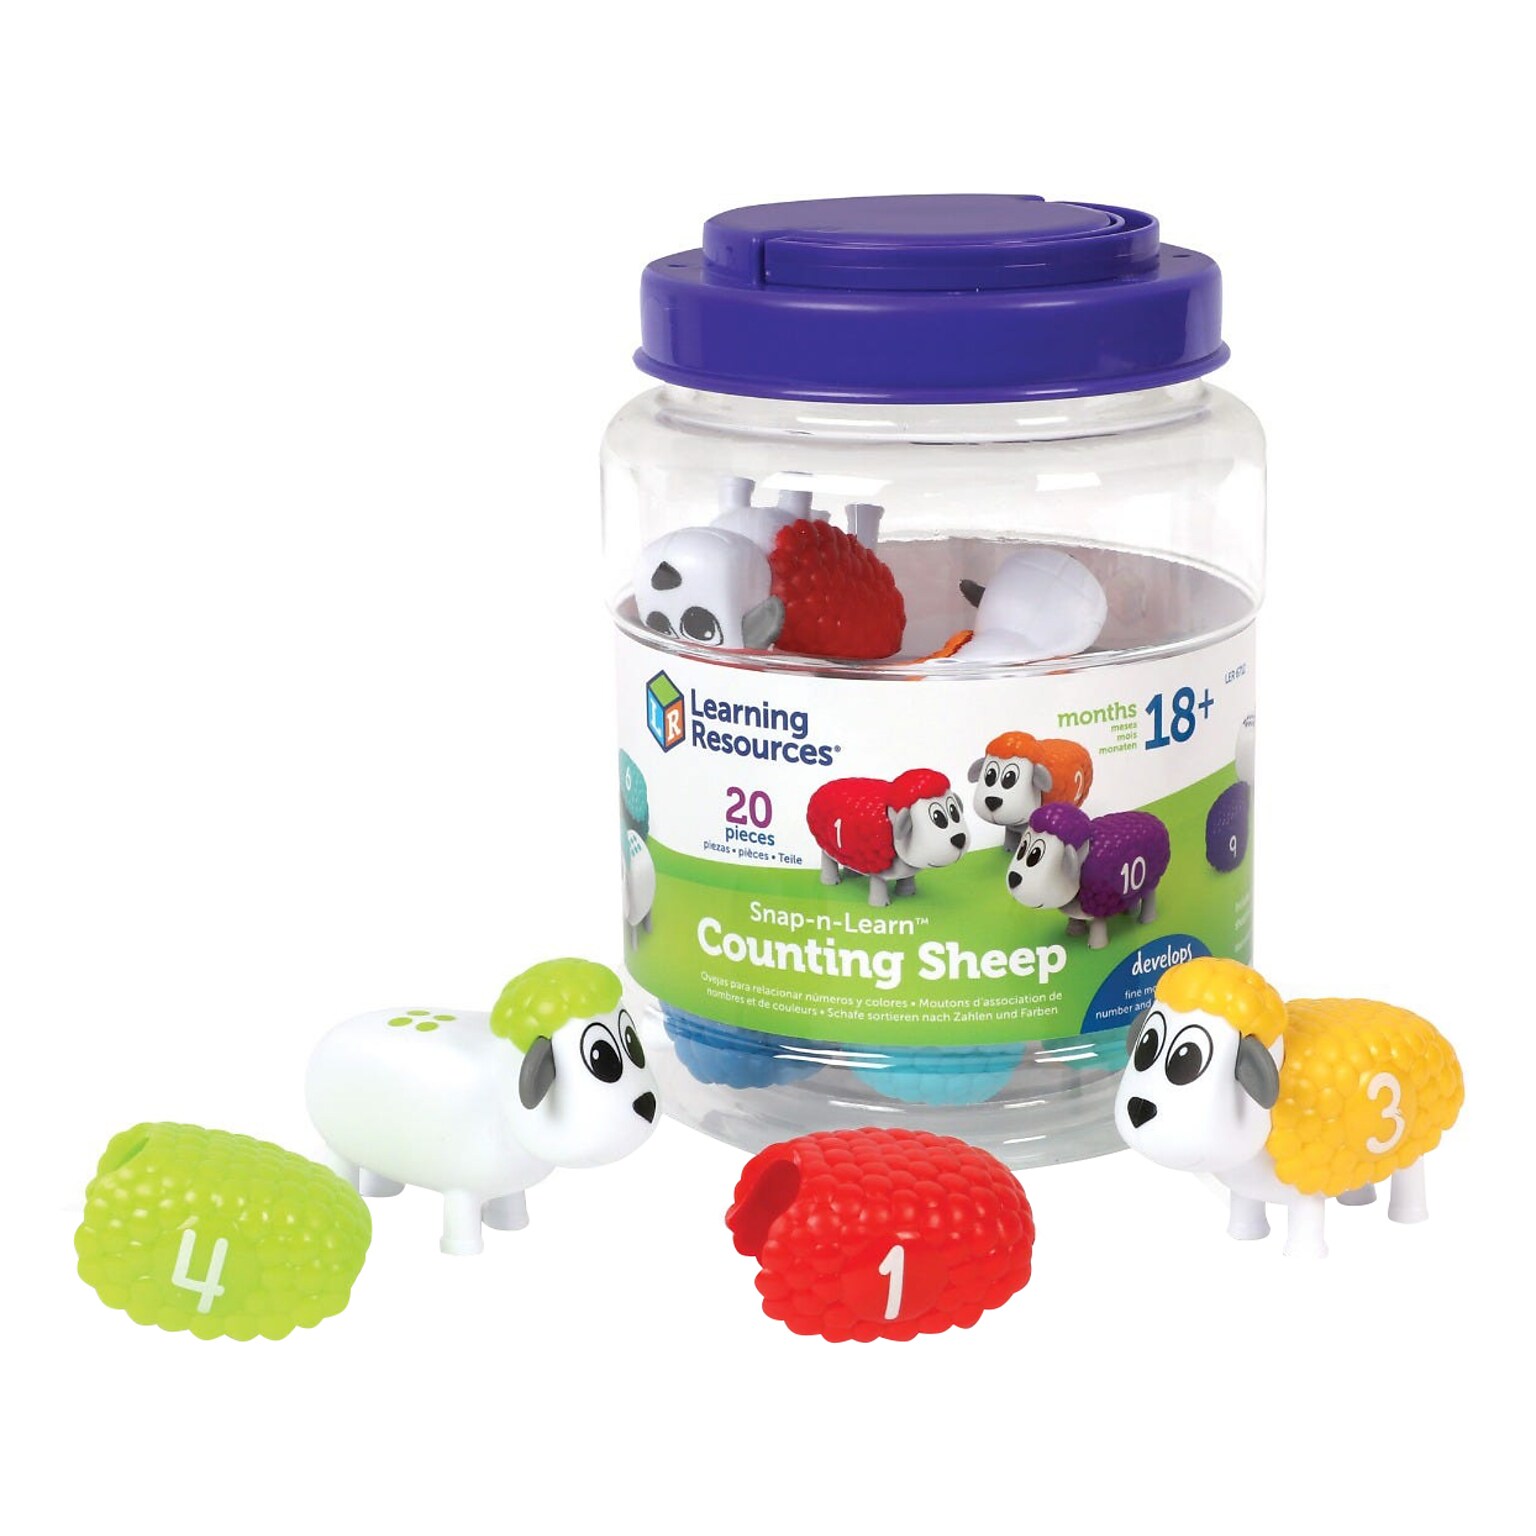 Learning Resources Snap-n-Learn Counting Sheep, 5.4 x 4.5 x 0.85, Assorted Colors (LER6712)